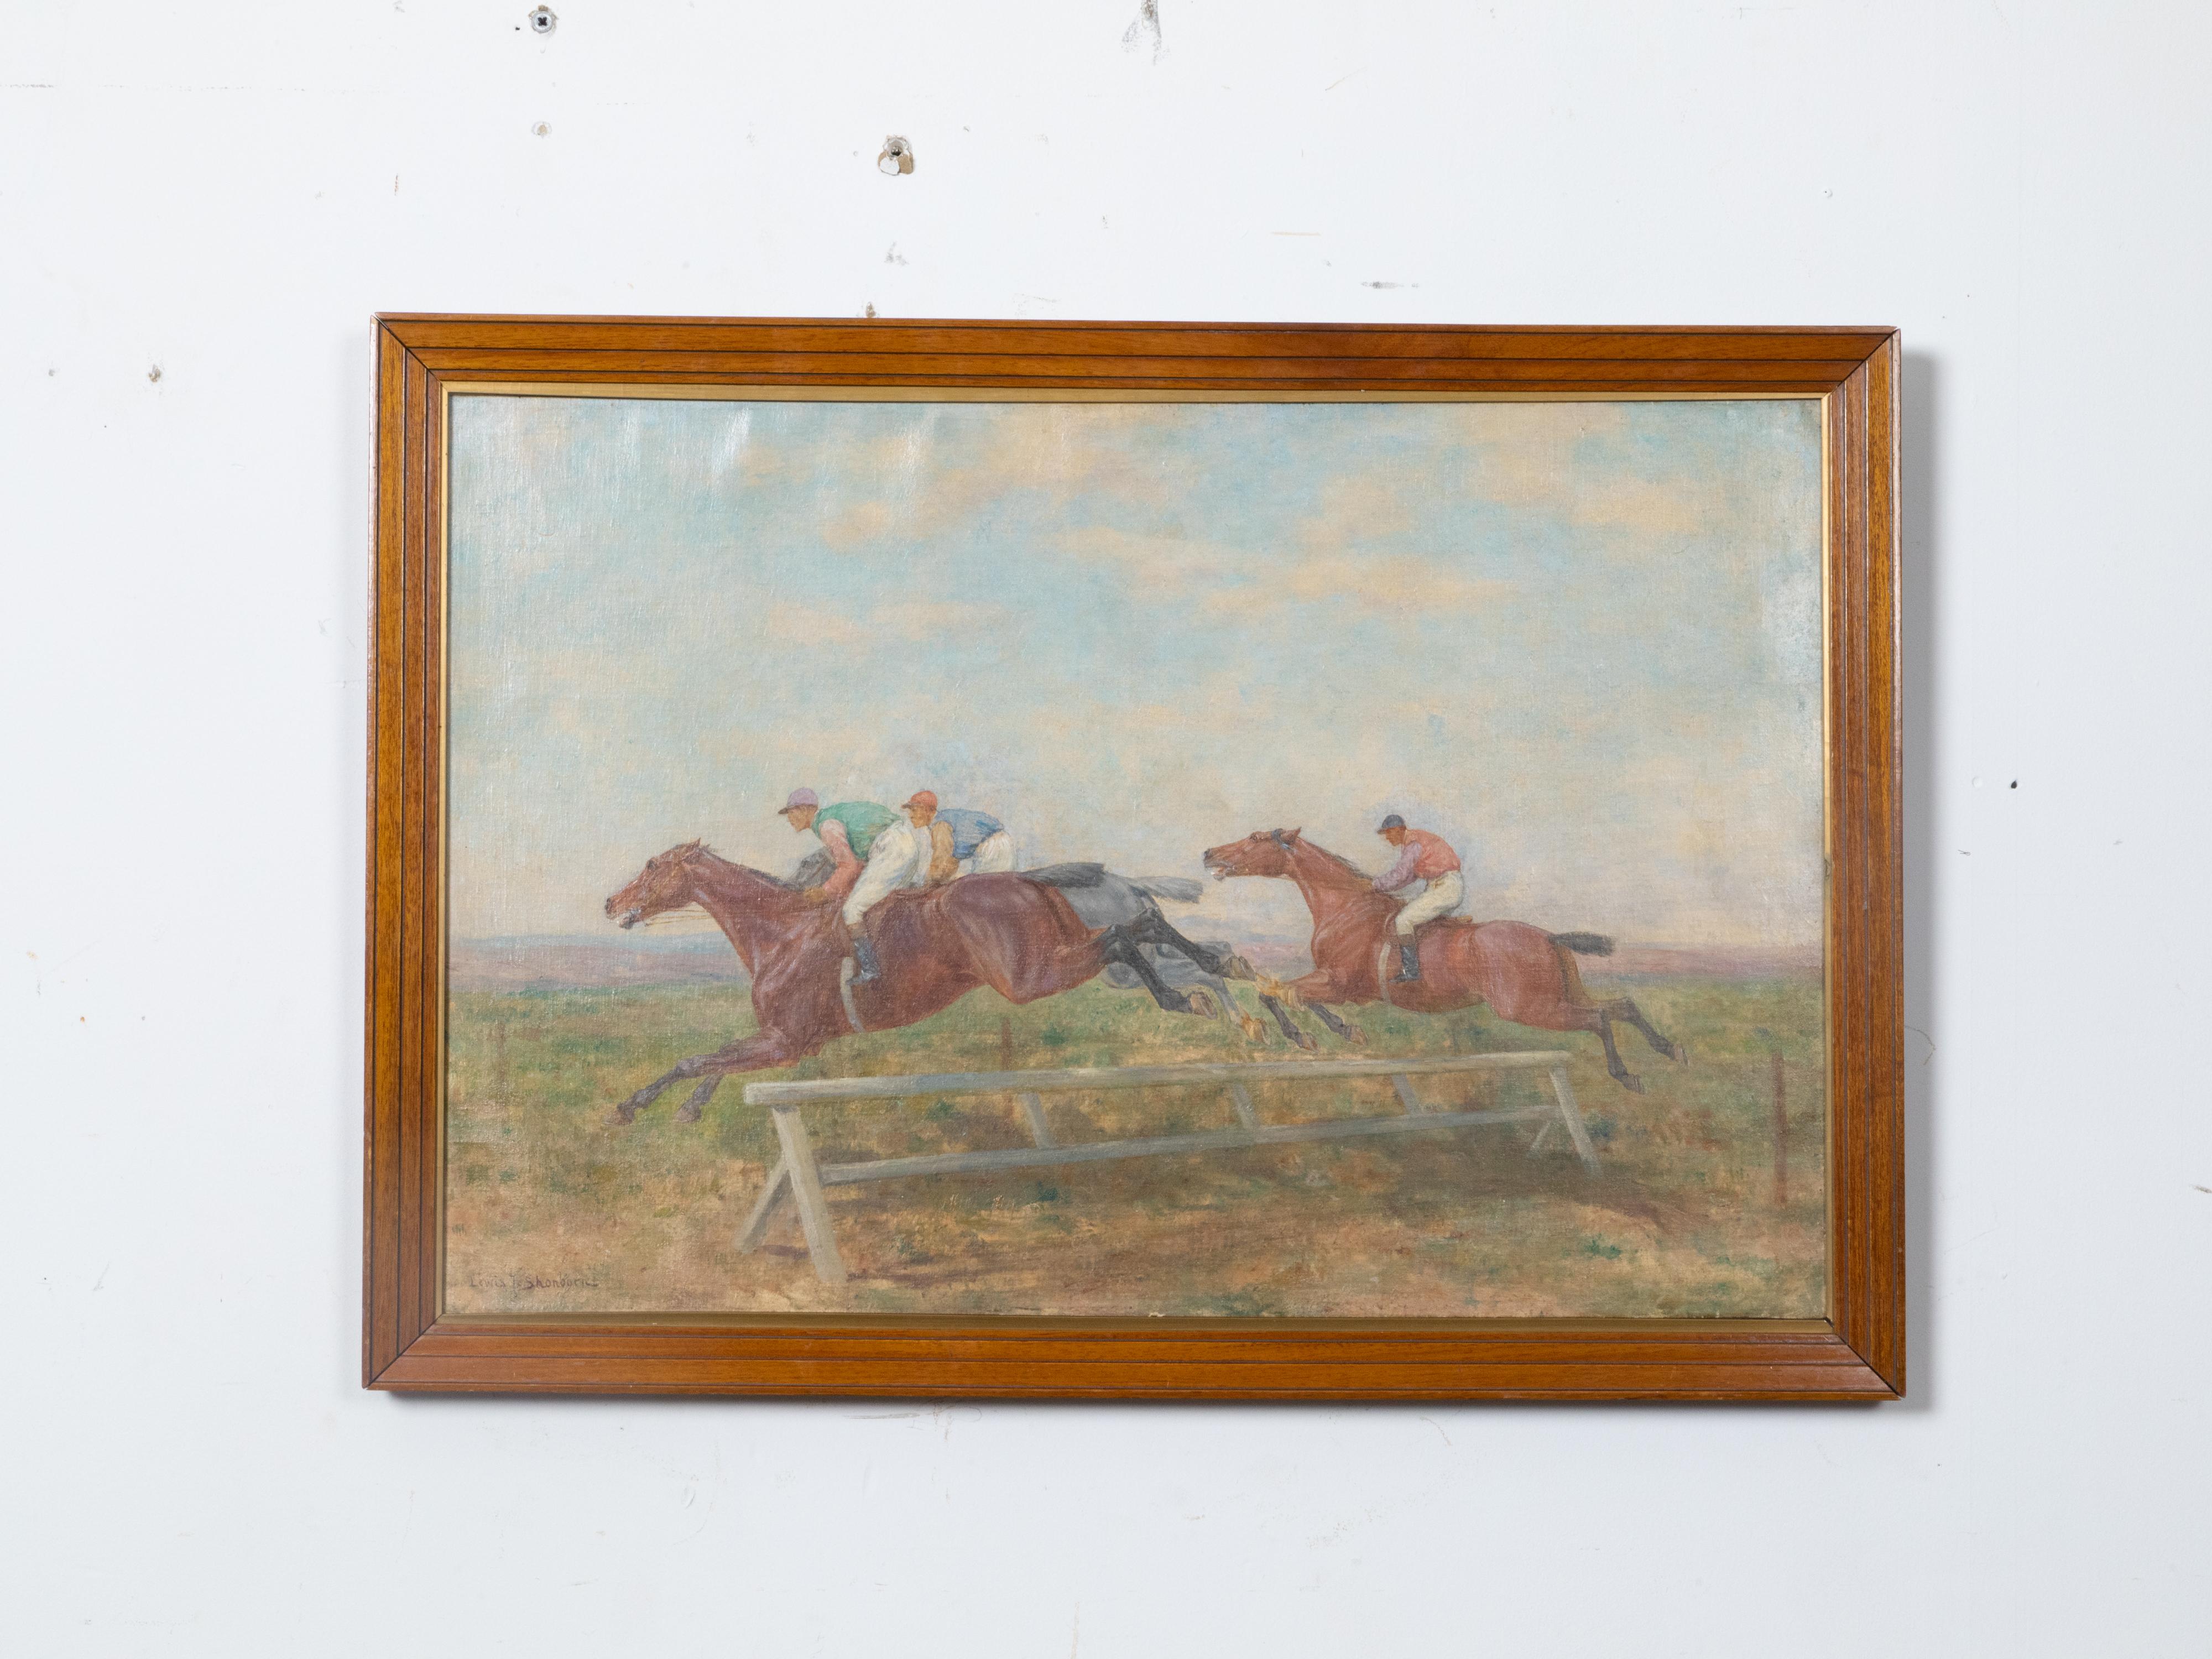 Oil on canvas horizontal painting by painter Lewis John Shonborn (1852-1931) depicting horses clearing the hurdle. This captivating horizontal oil painting on canvas, created by artist Lewis John Shonborn (1852-1931), showcases his signature